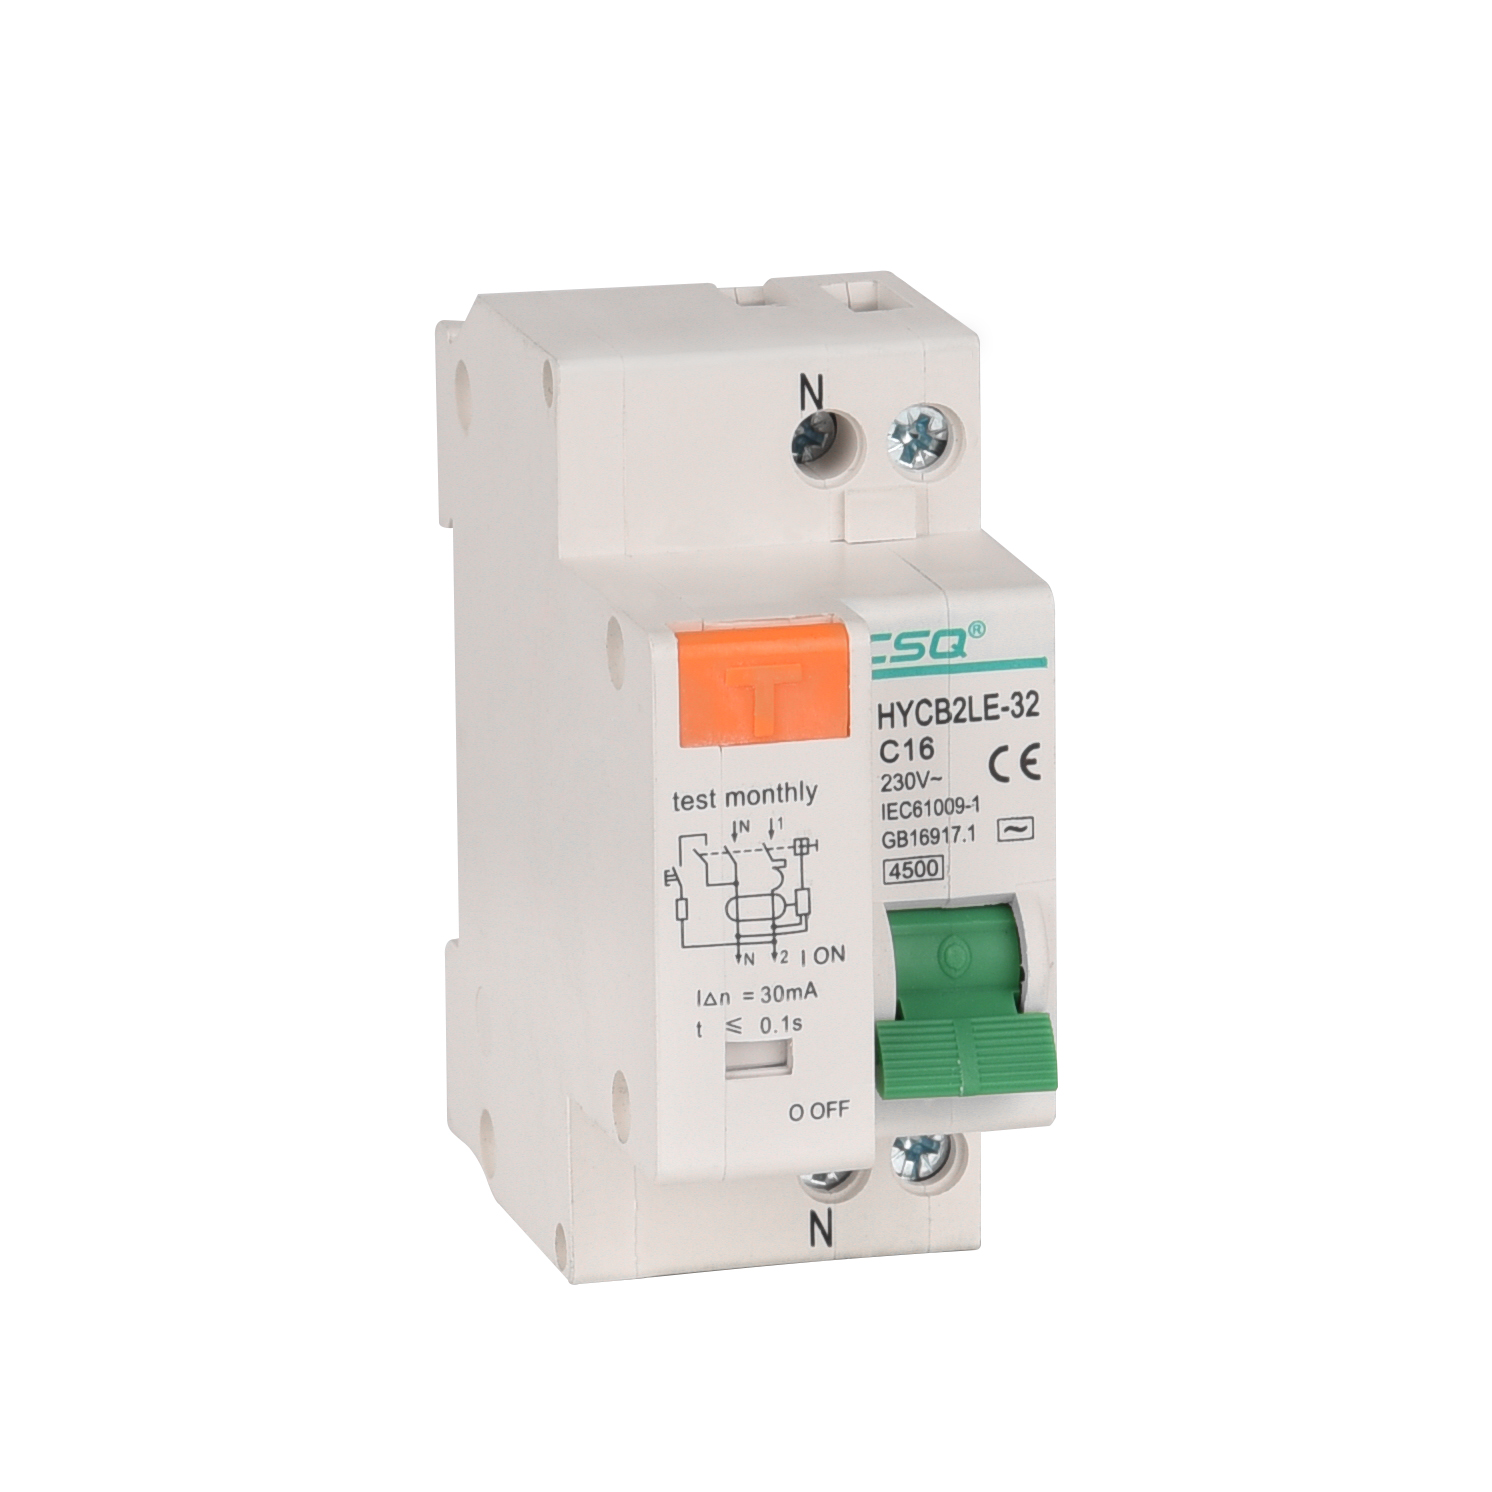 HYCB2LE-32(DPNLE) Earth Leakage Circuit Breakers